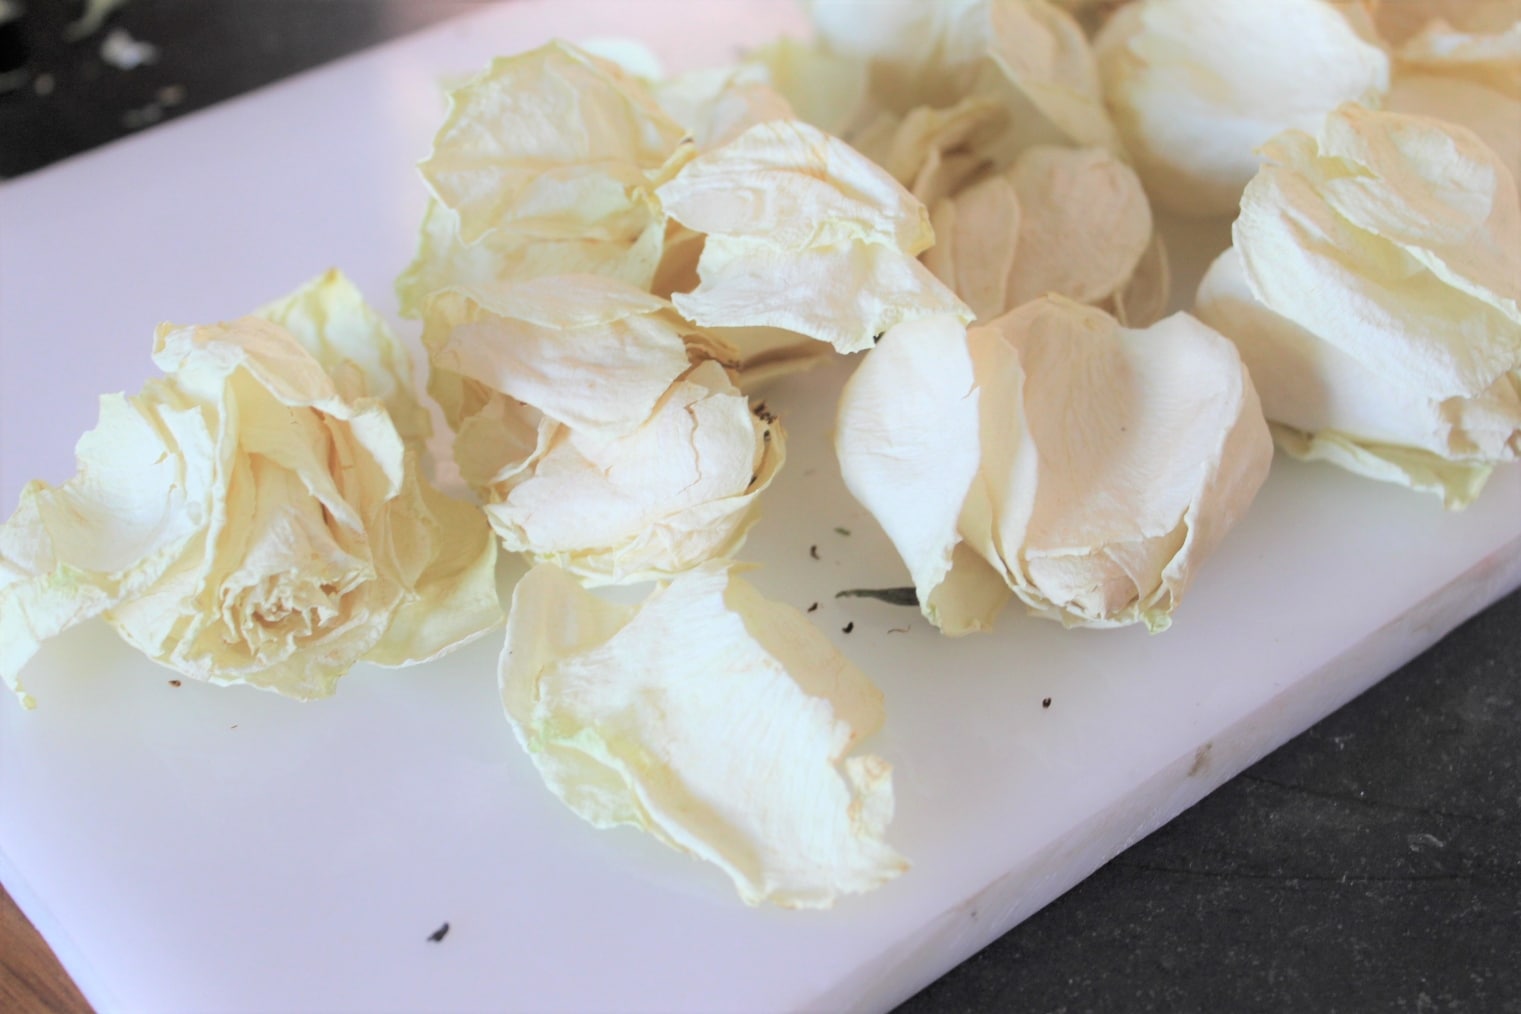 How To Dry Rose Petals For Soap Making - Rose Petals Soap Recipe – VedaOils